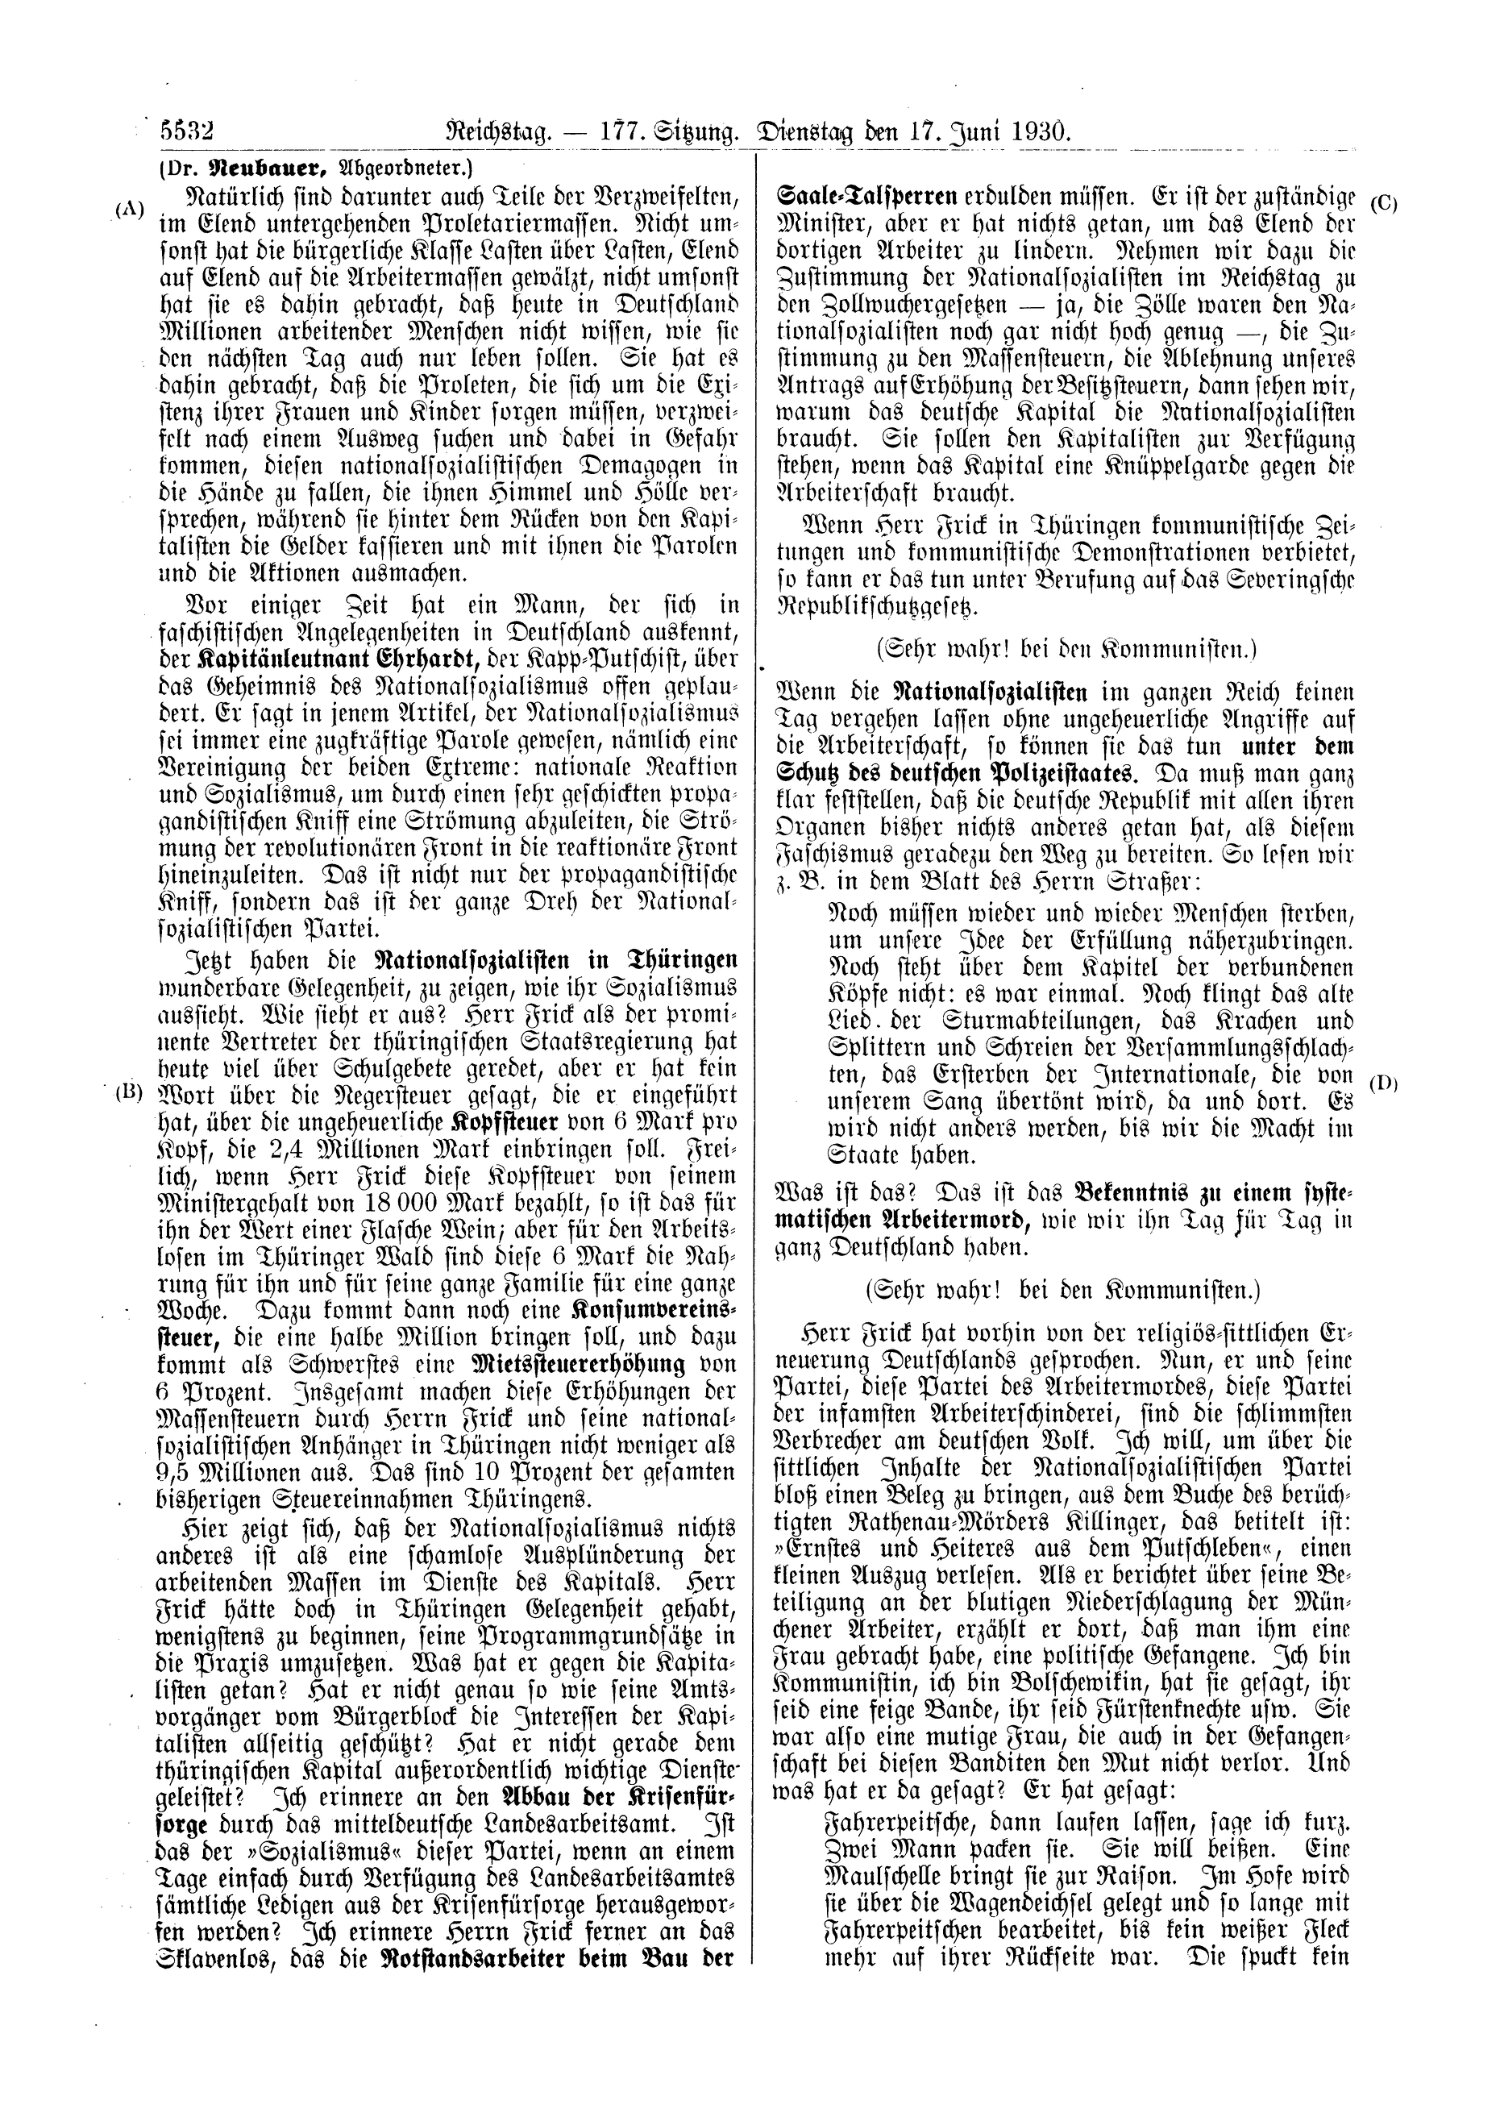 Scan of page 5532